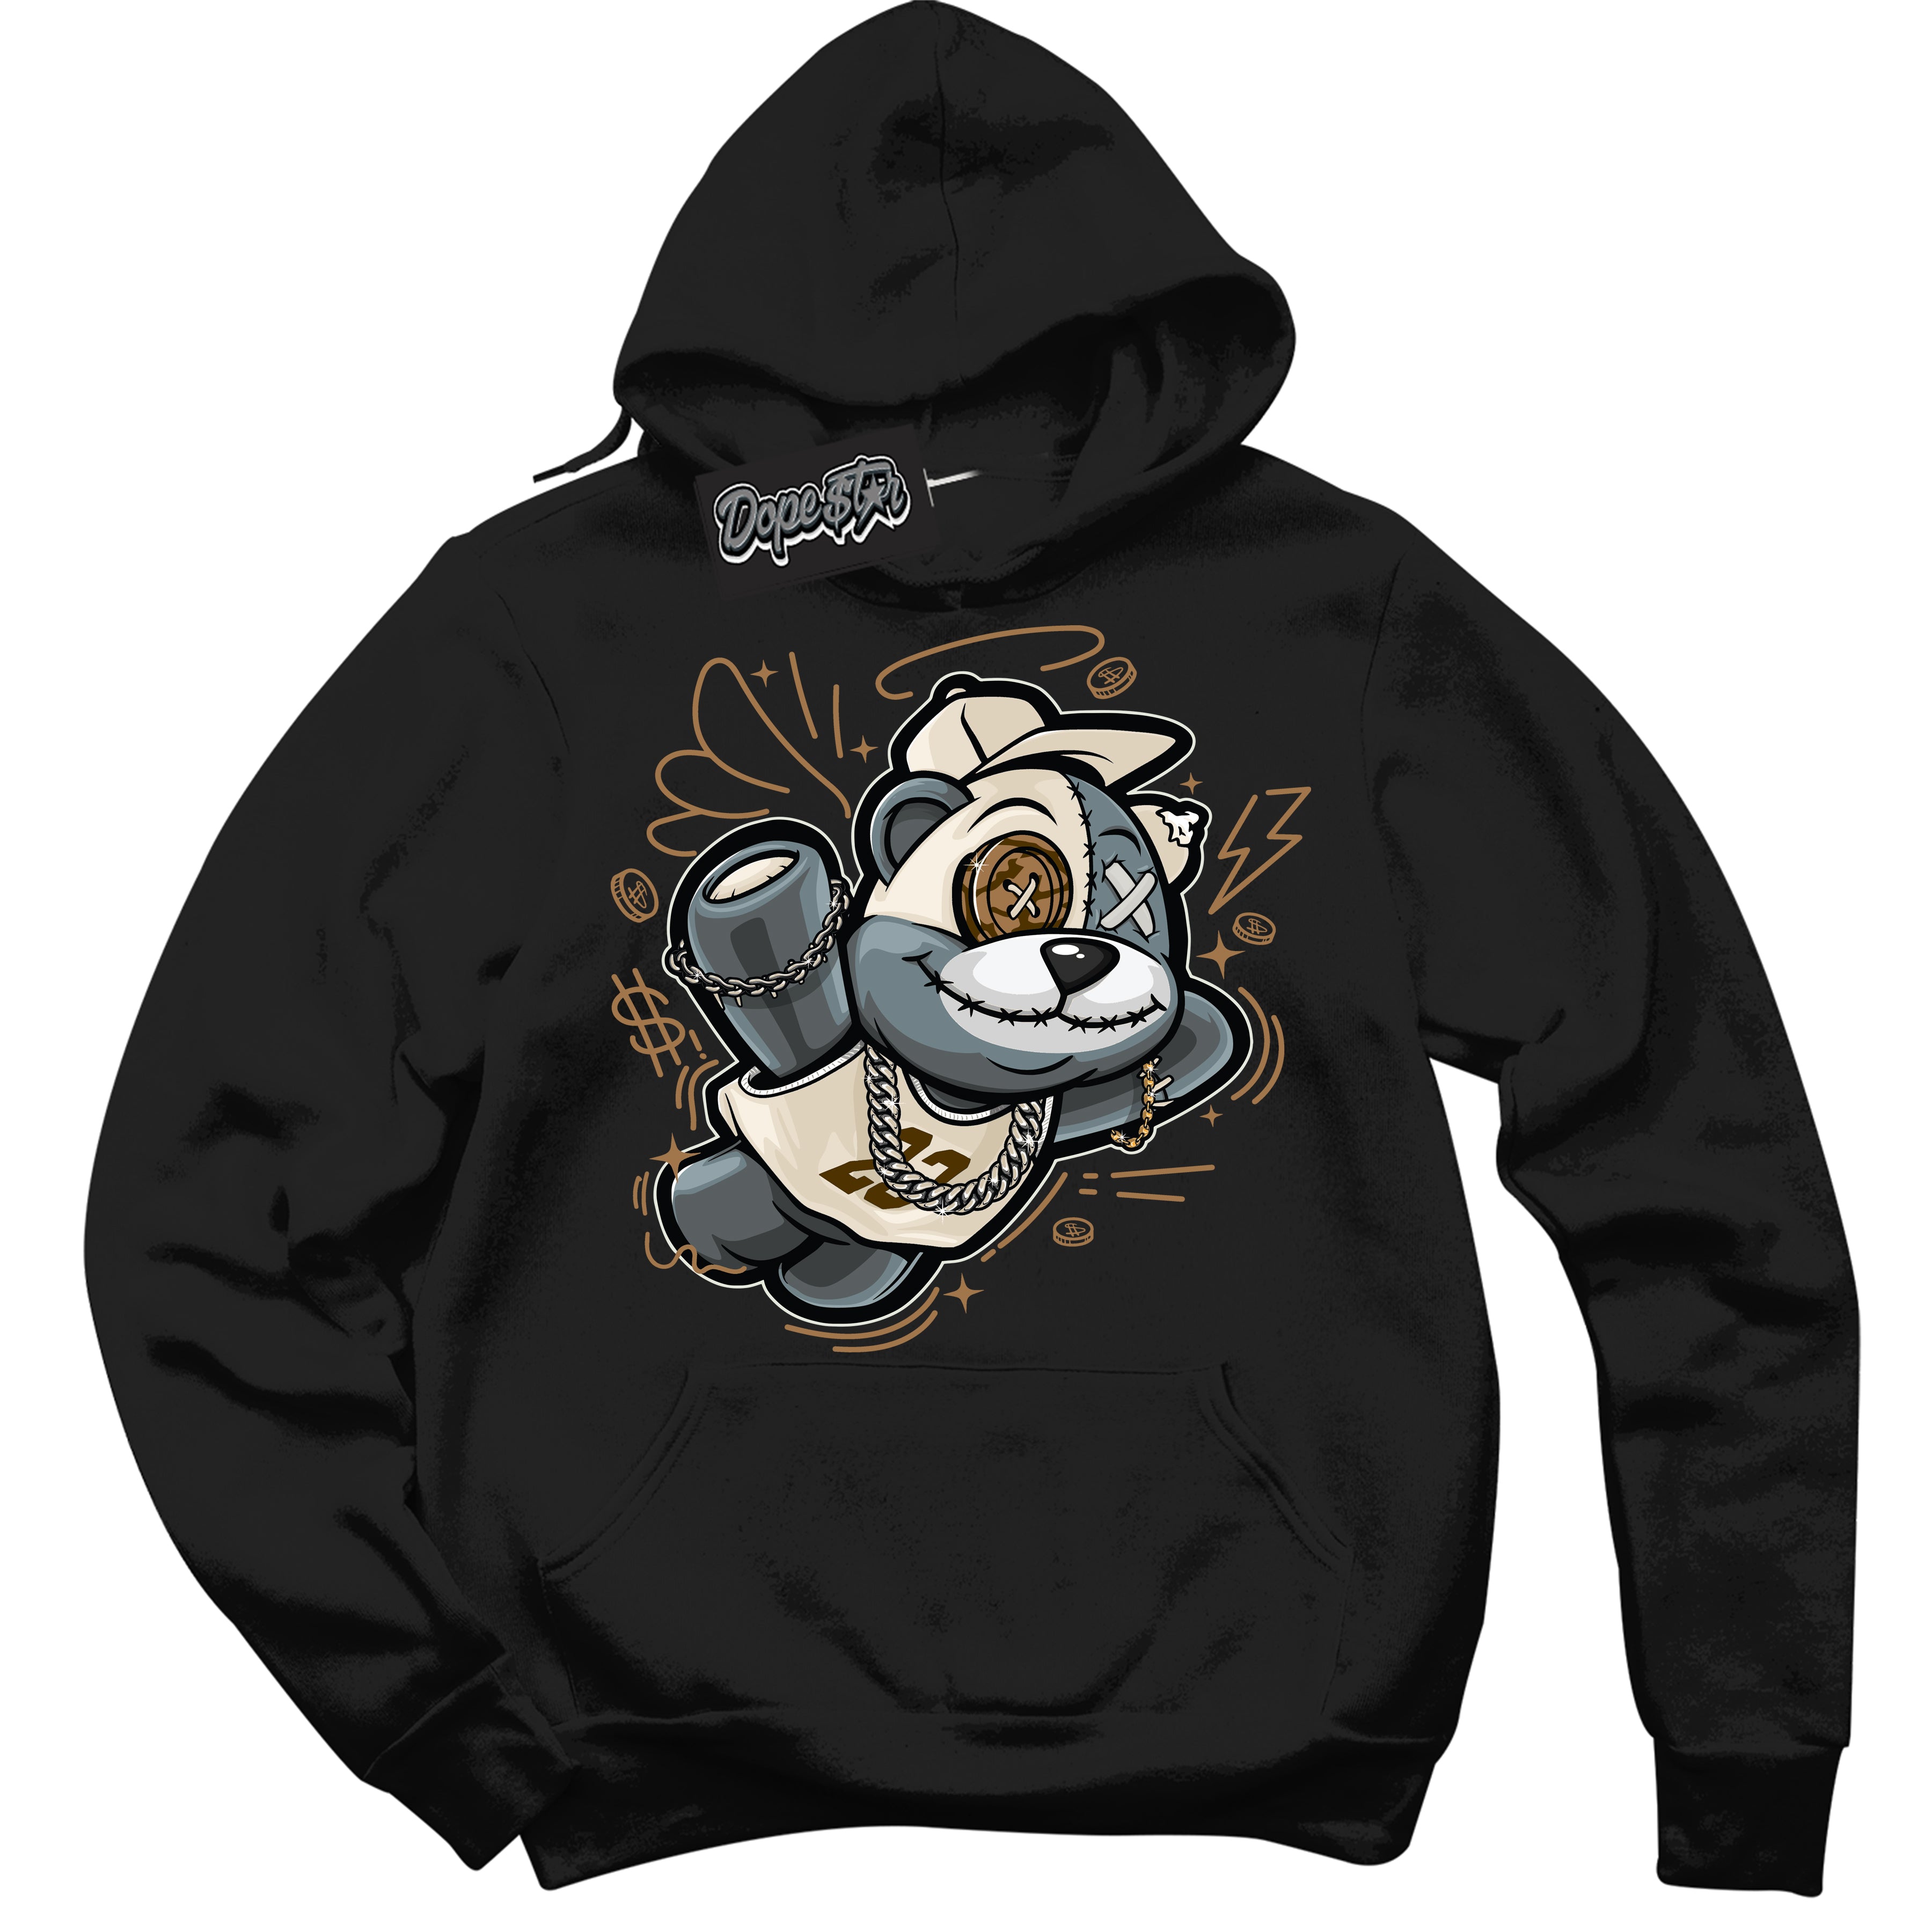 Cool Black Graphic DopeStar Hoodie with “ Slam Dunk Bear “ print, that perfectly matches Palomino 3s sneakers